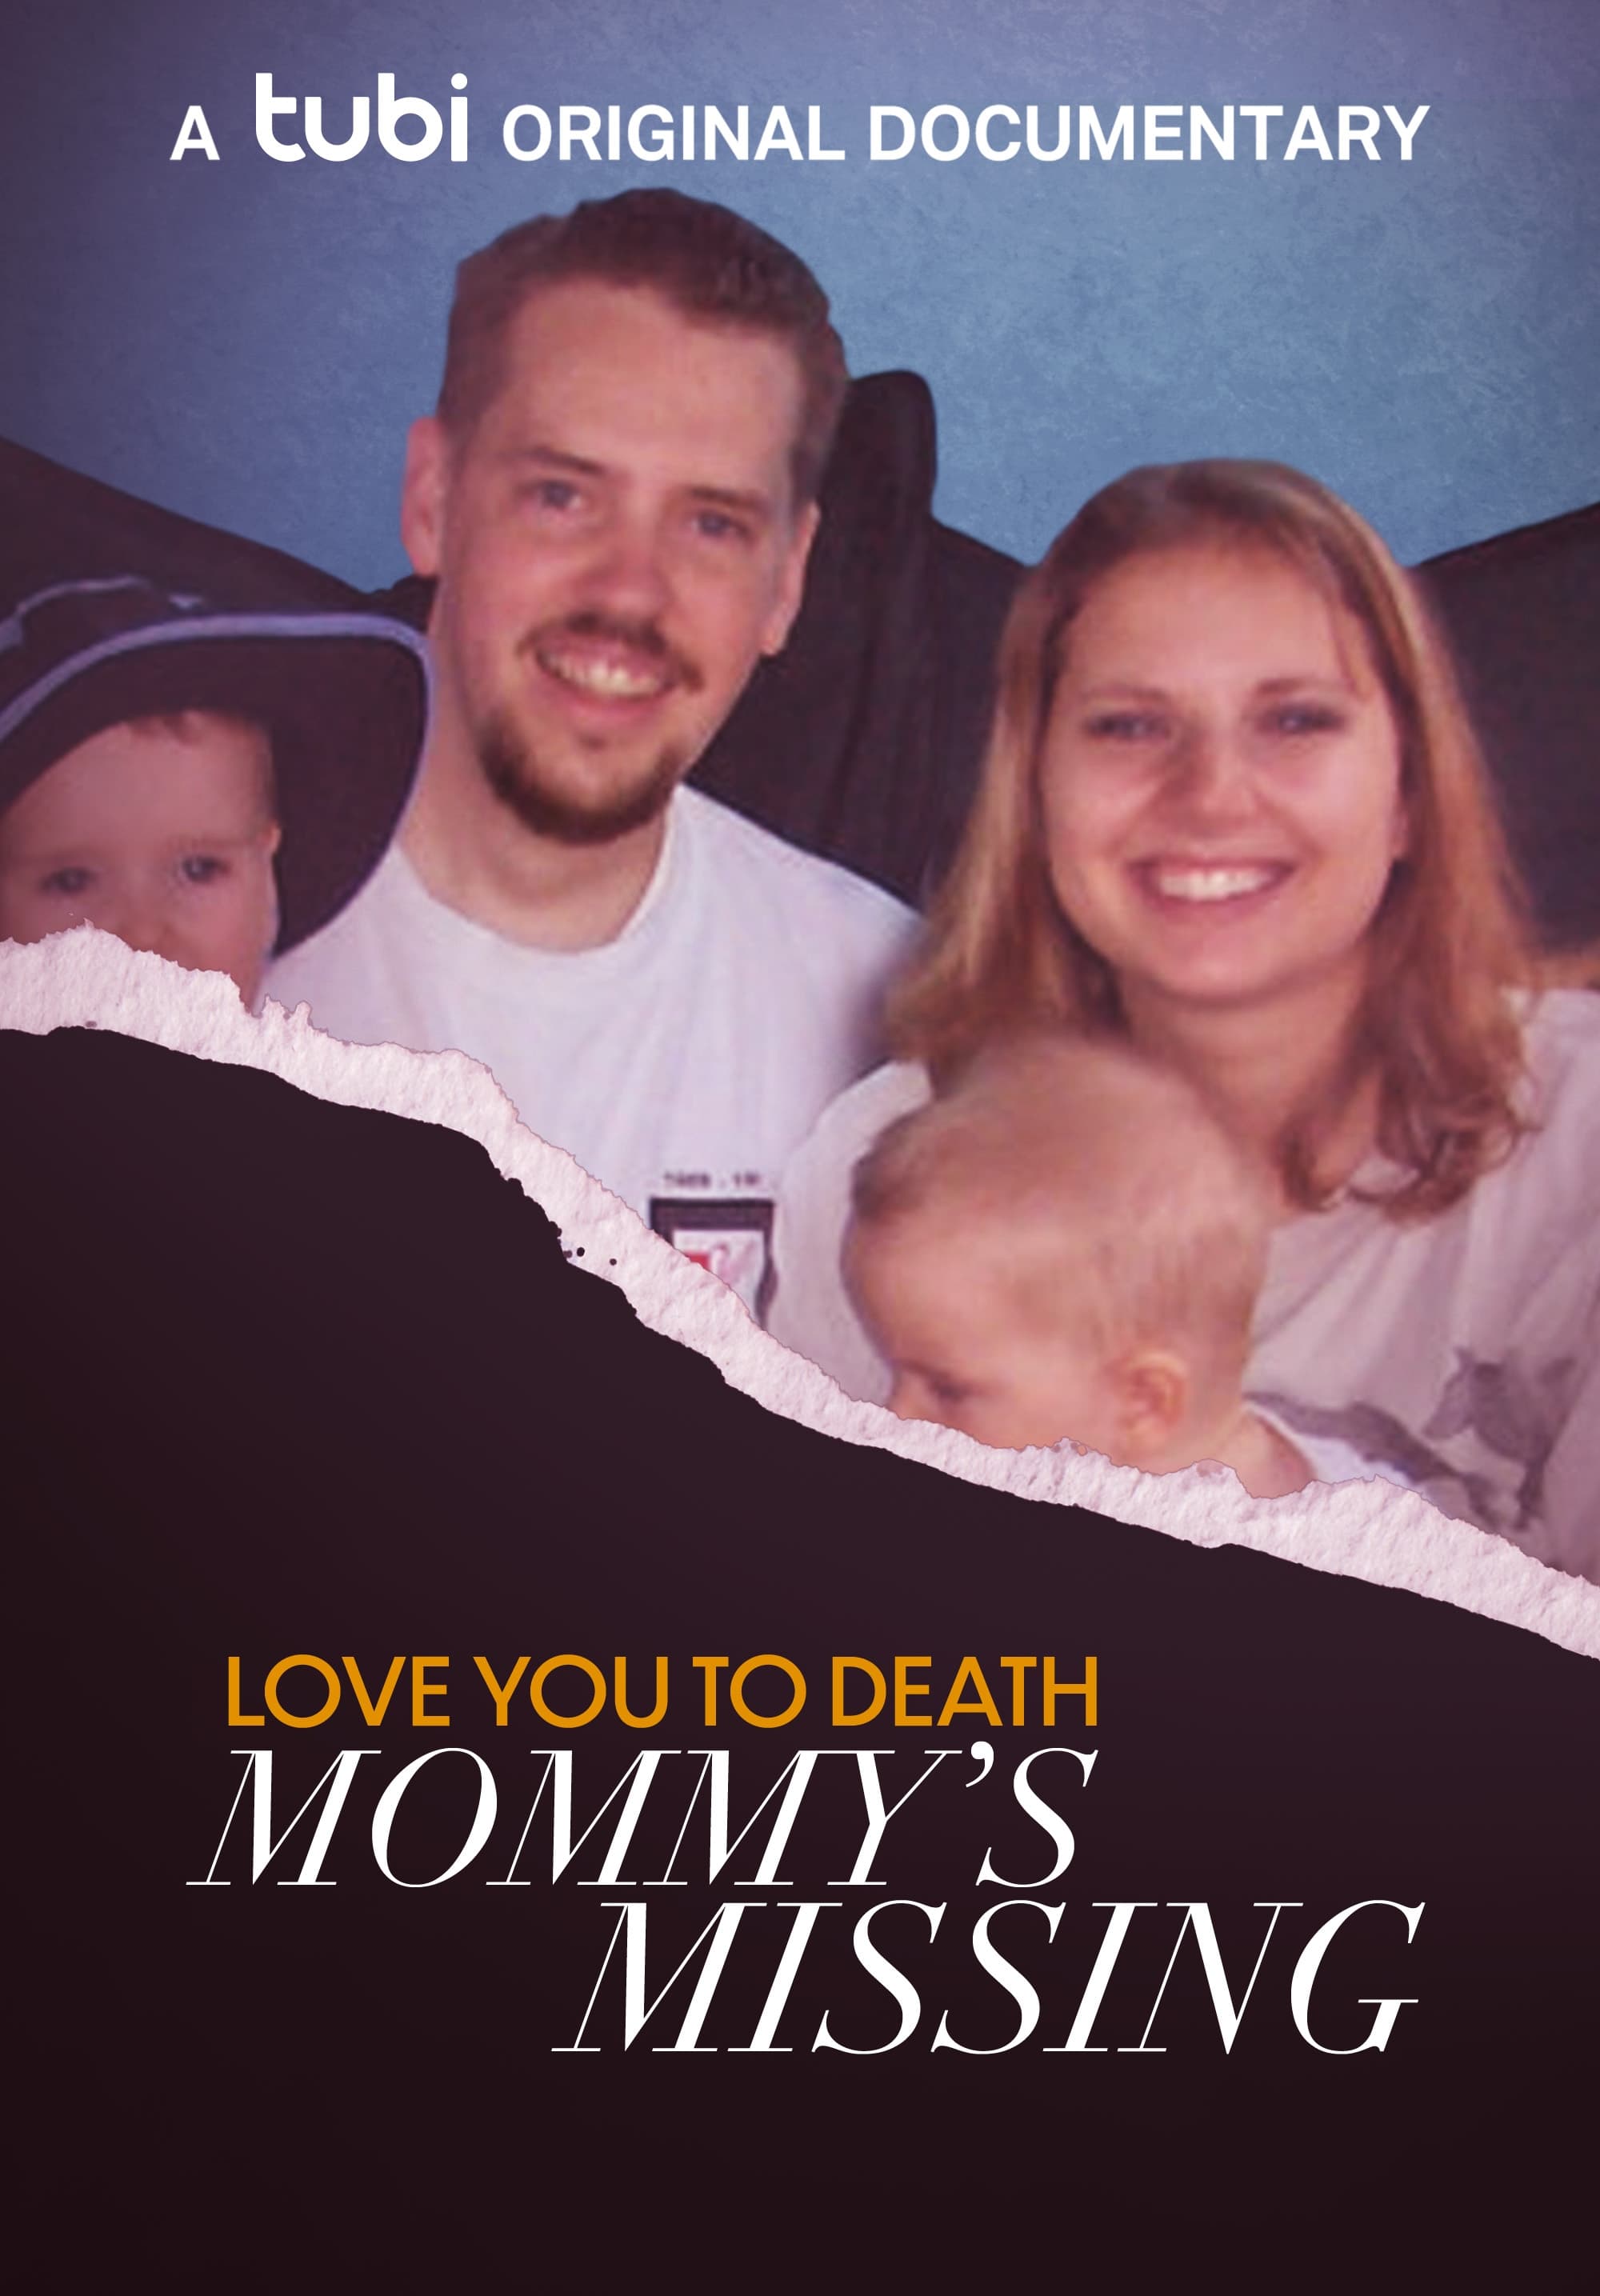 Love You to Death: Mommy's Missing